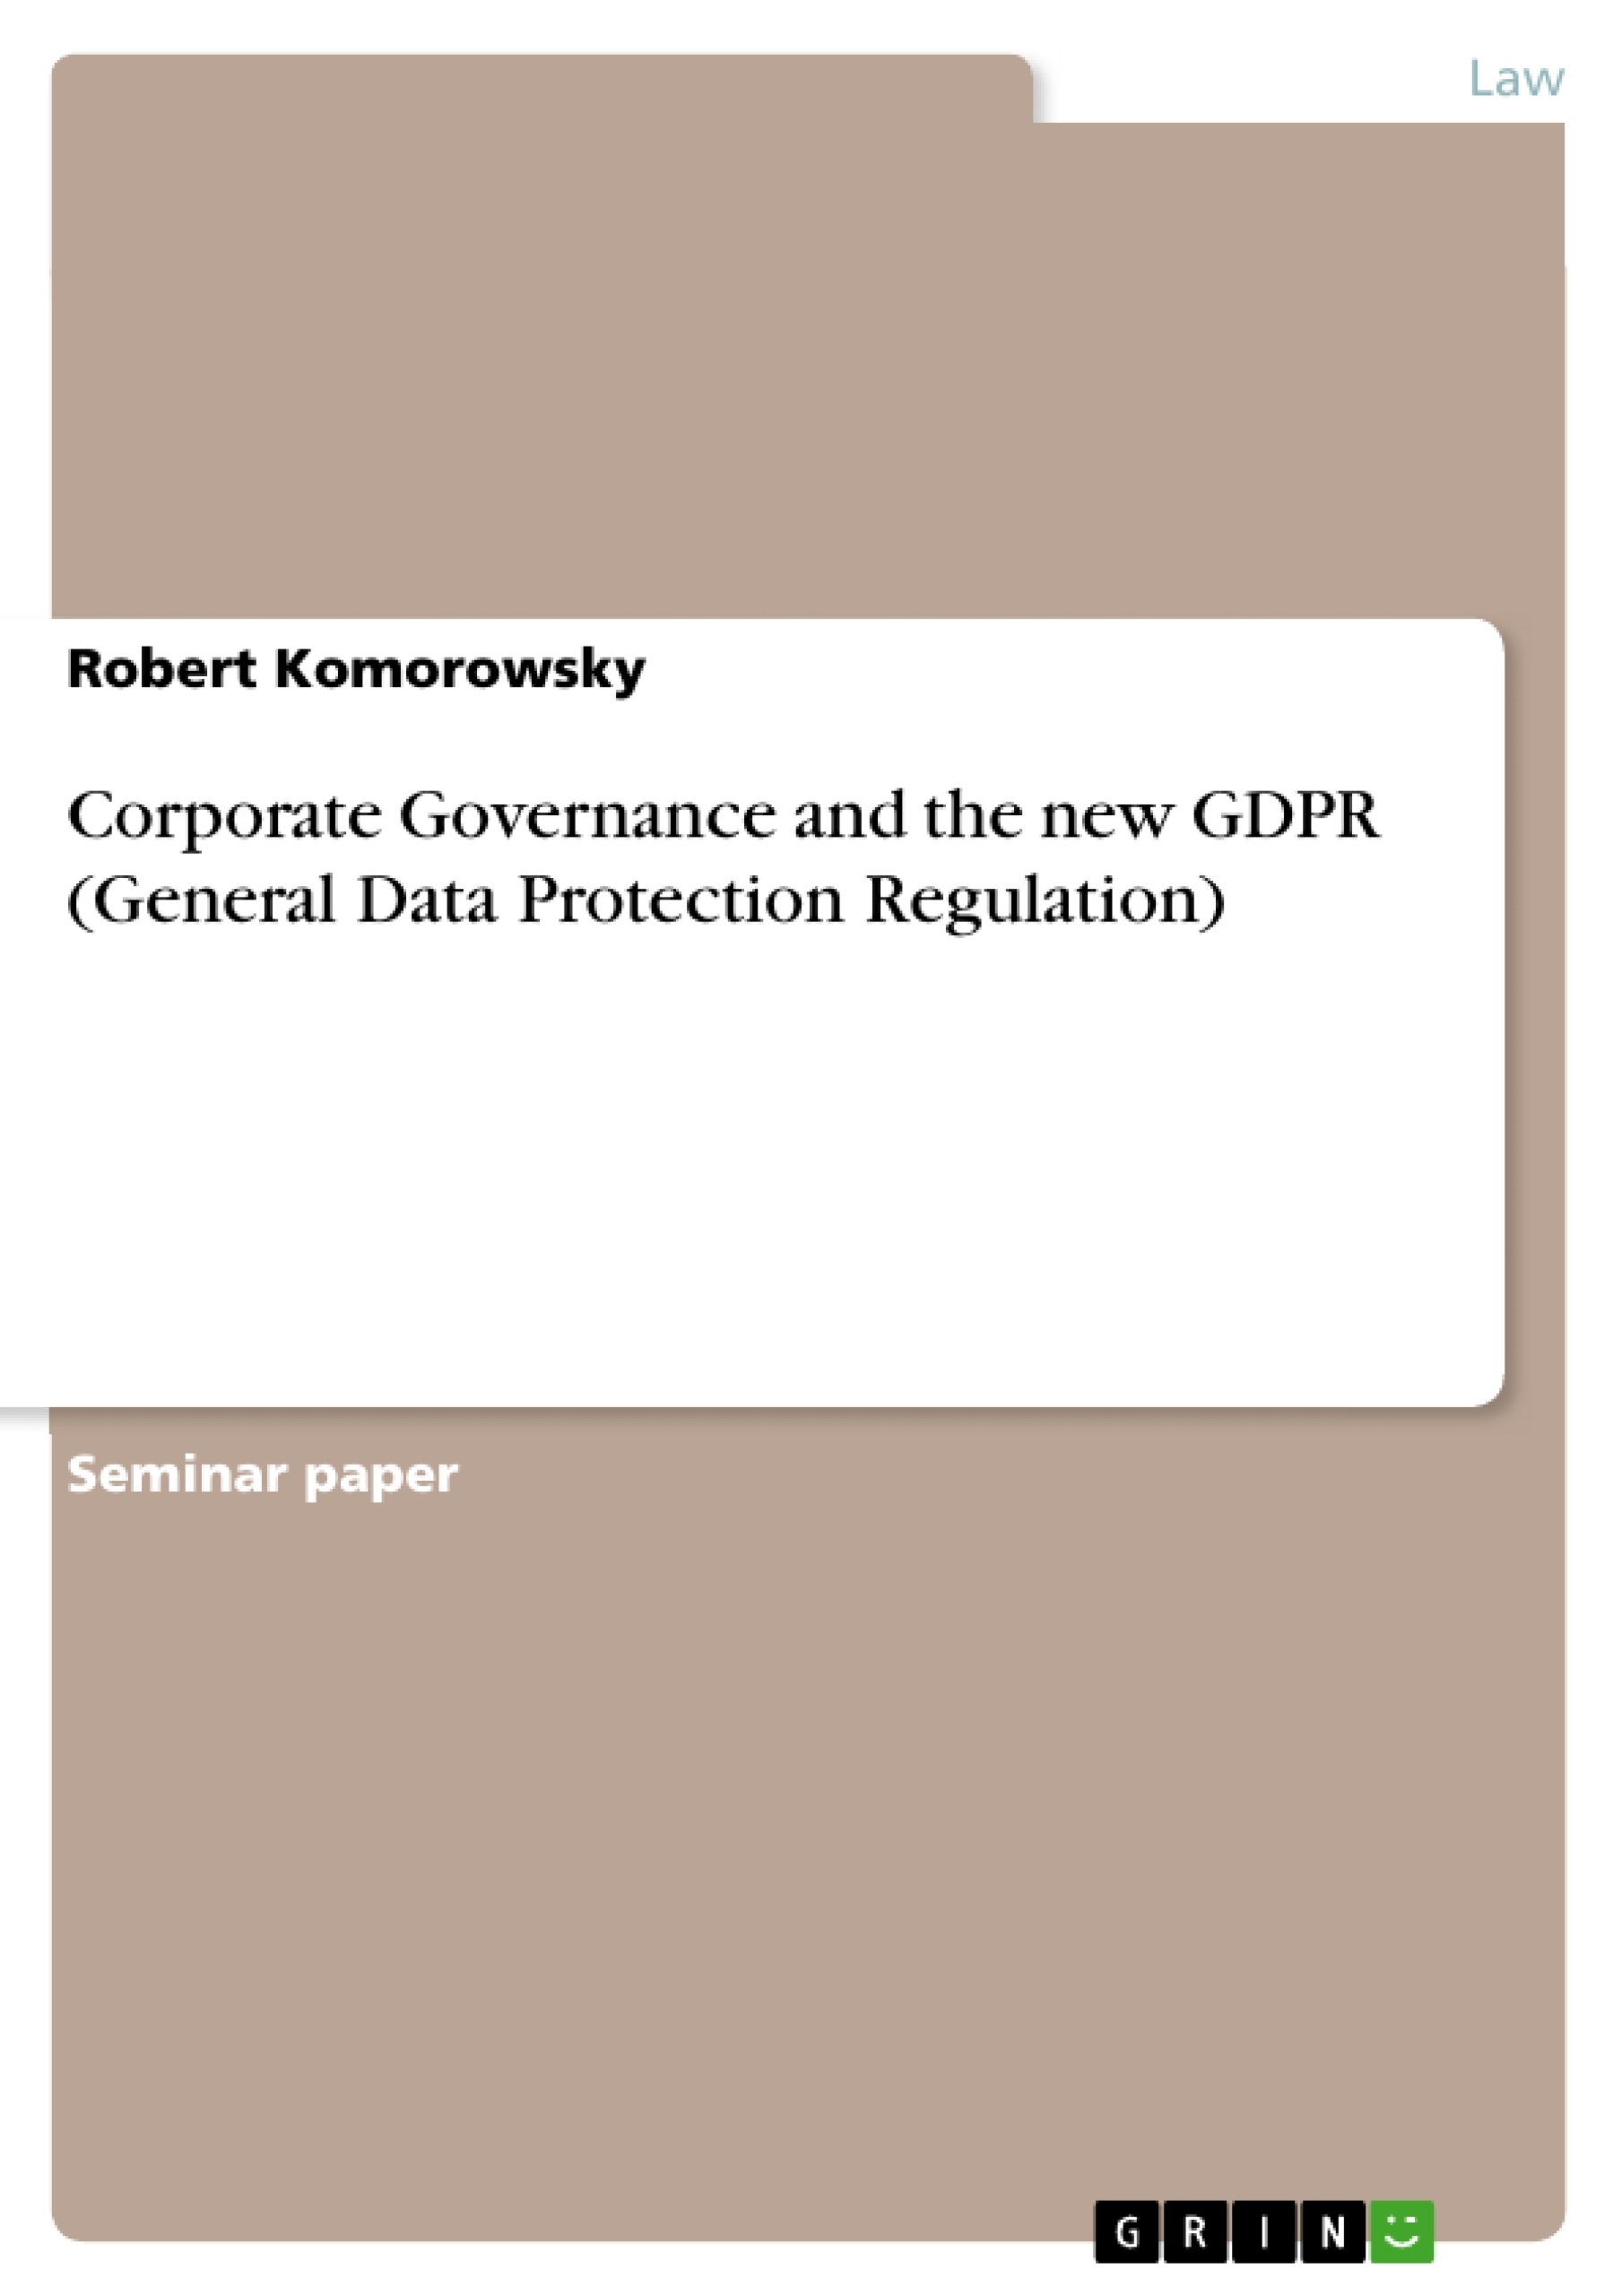 Título: Corporate Governance and the new GDPR (General Data Protection Regulation)